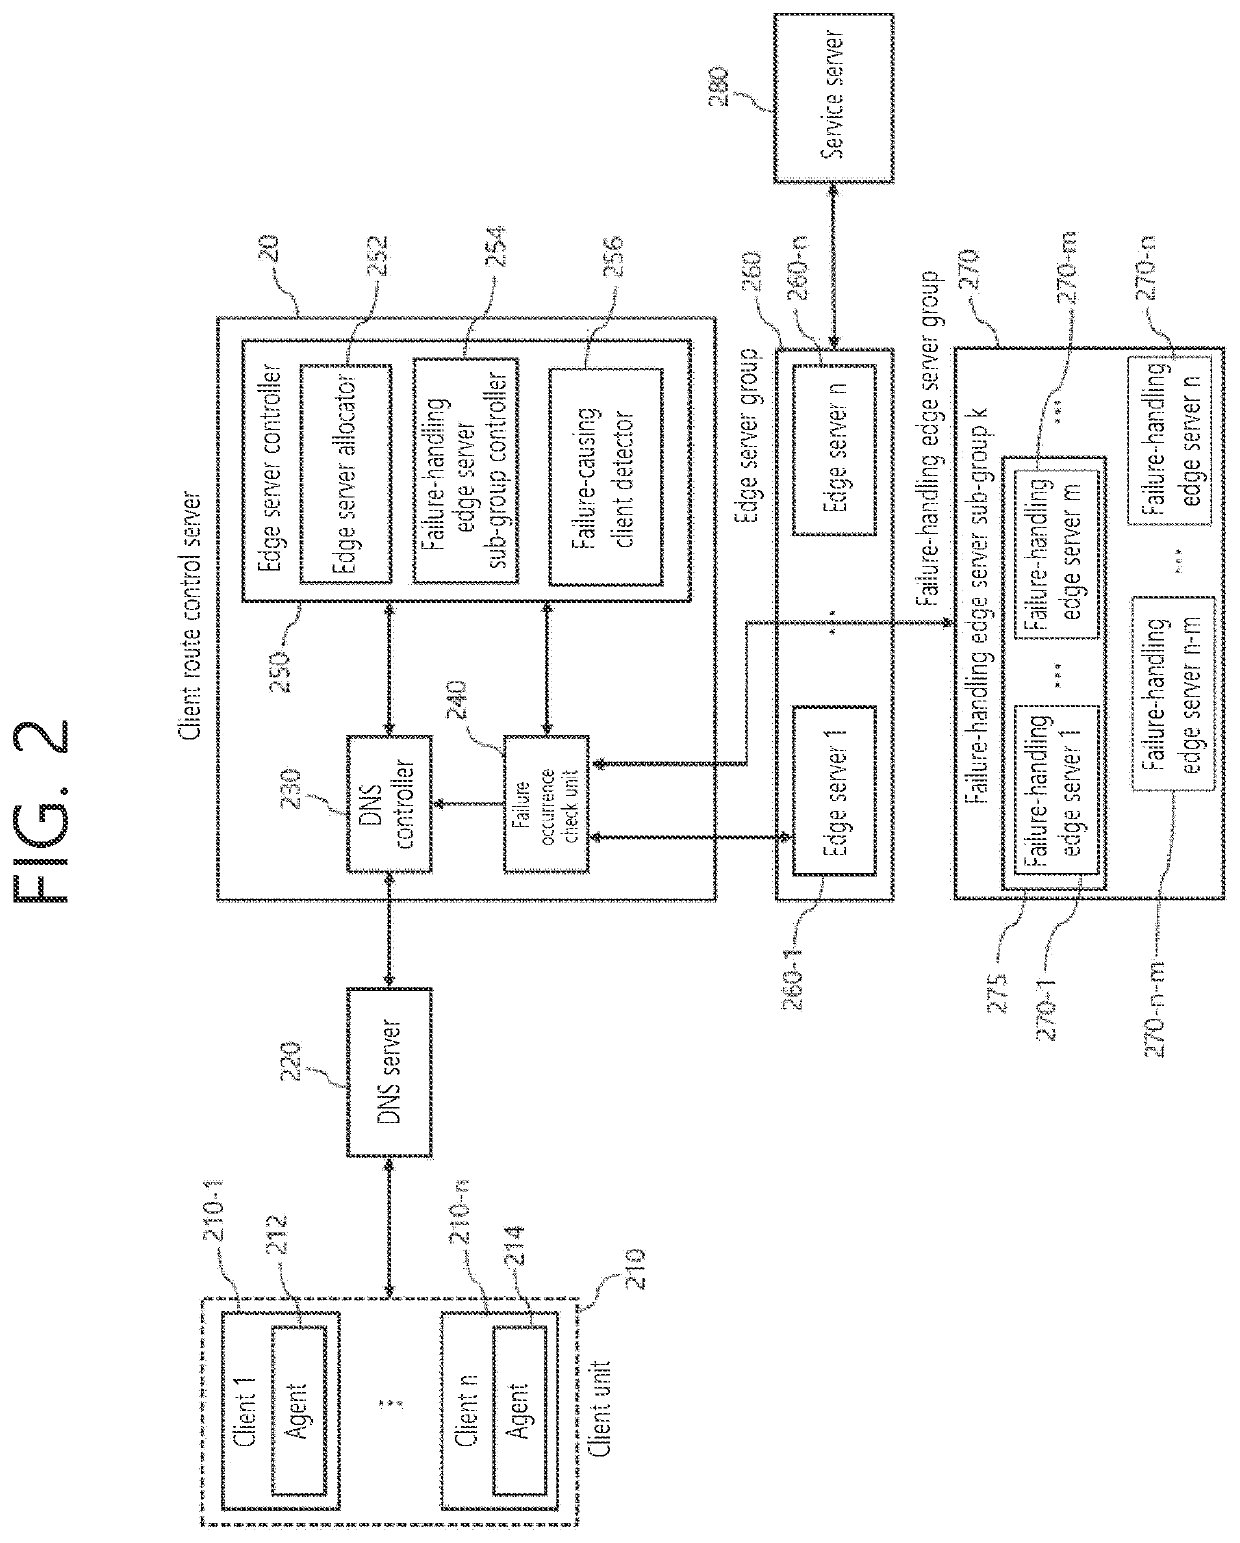 Method and system for detecting failure-causing client with failure handling edge server grouping